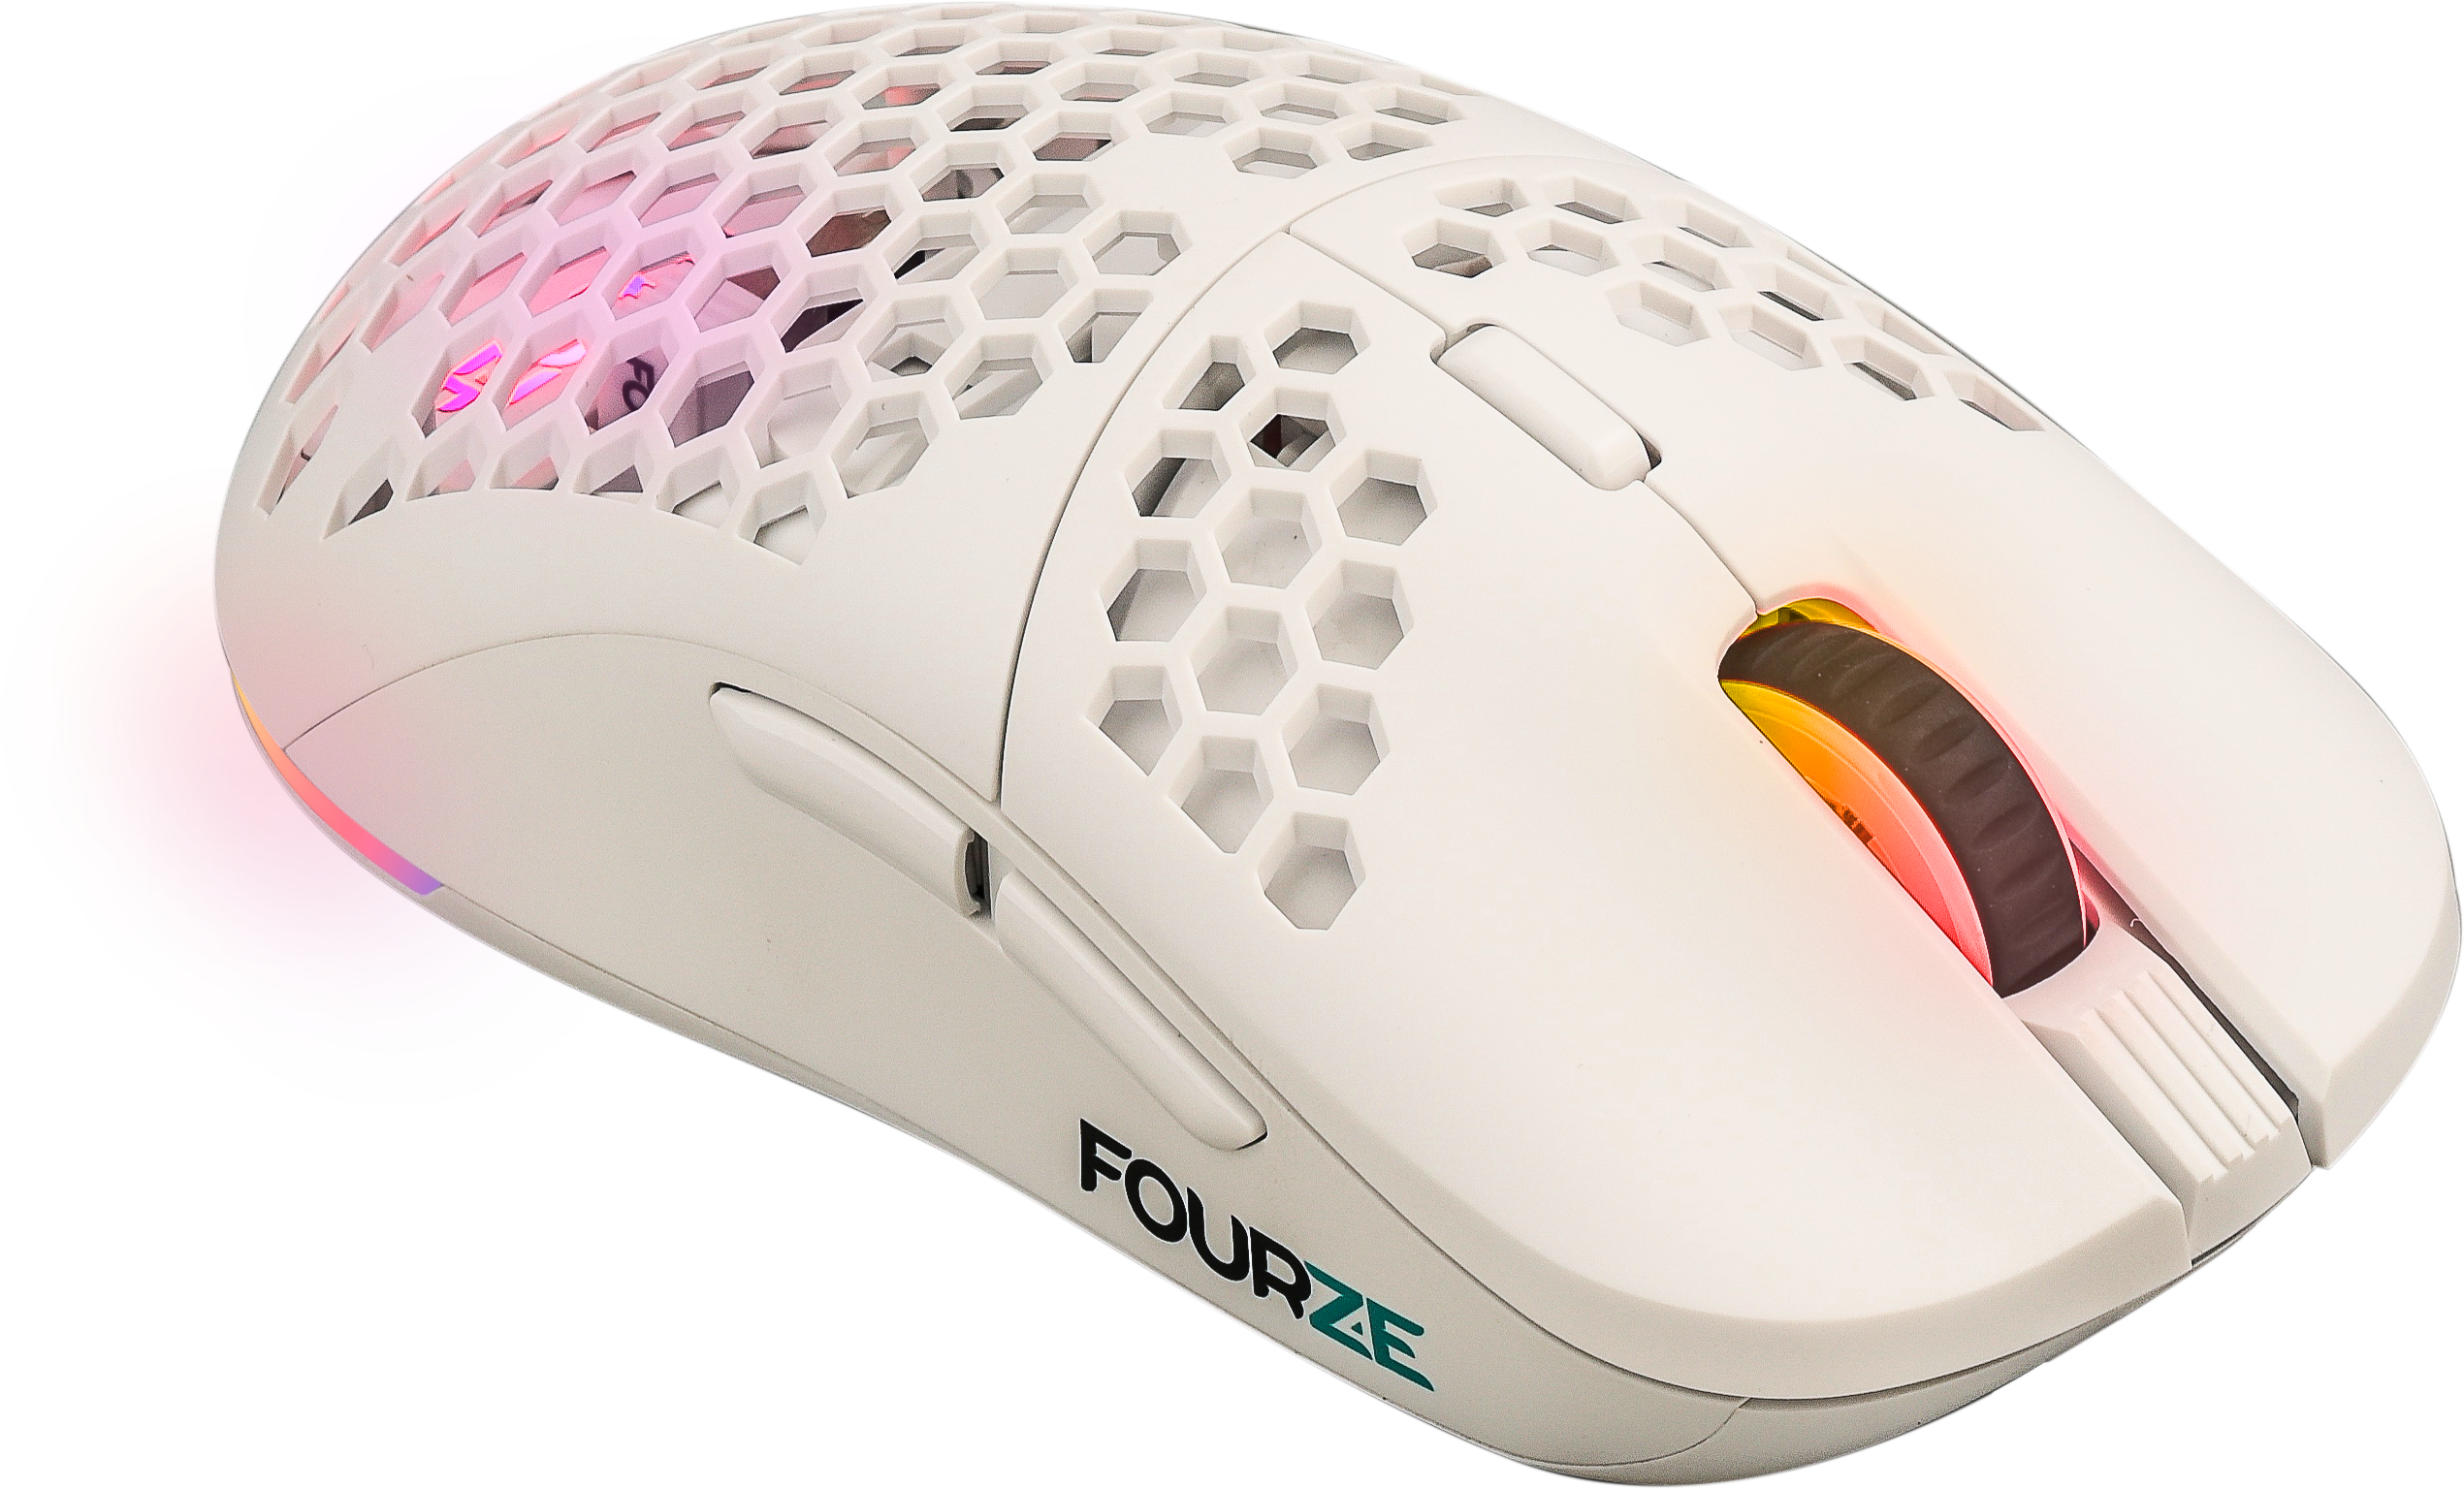 5713552003072 Fourze GM900 Wireless Gaming Mouse White - Trådløs mus Computer & IT,Gaming,Gaming trådløs mus 3400003880 FZ-GM900-002